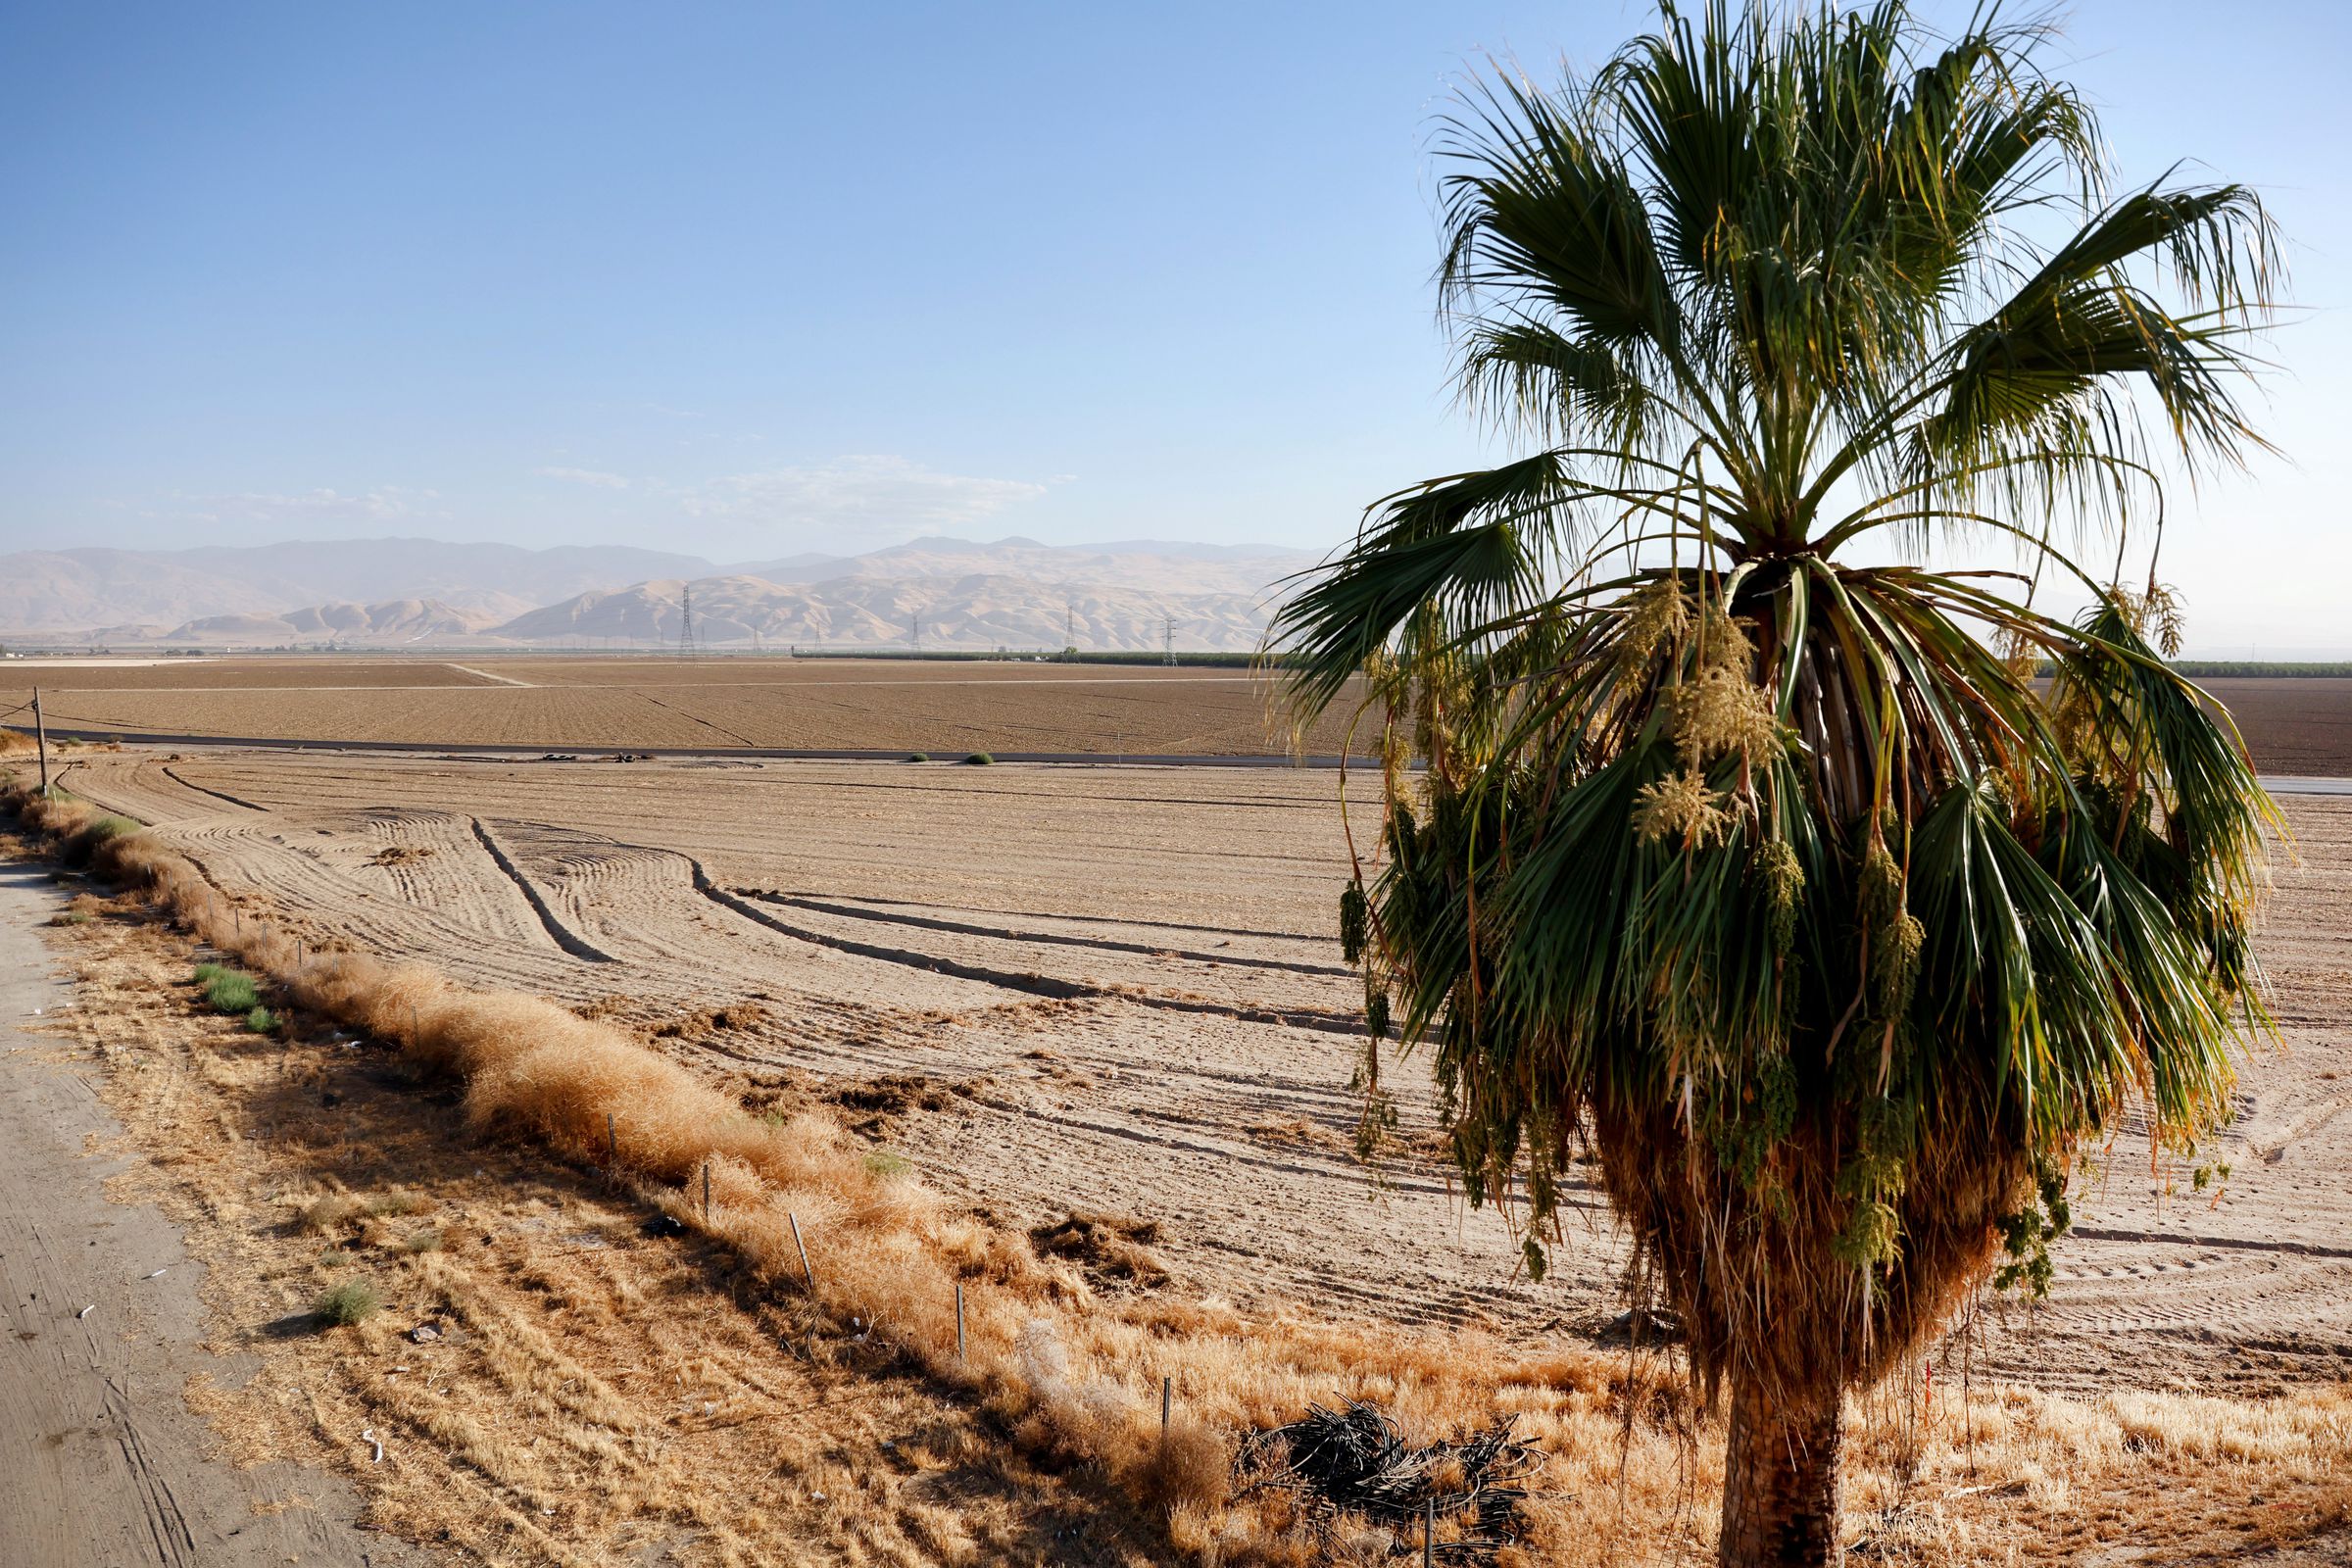 A lone palm tree stands above dry, barren agricultural fields.